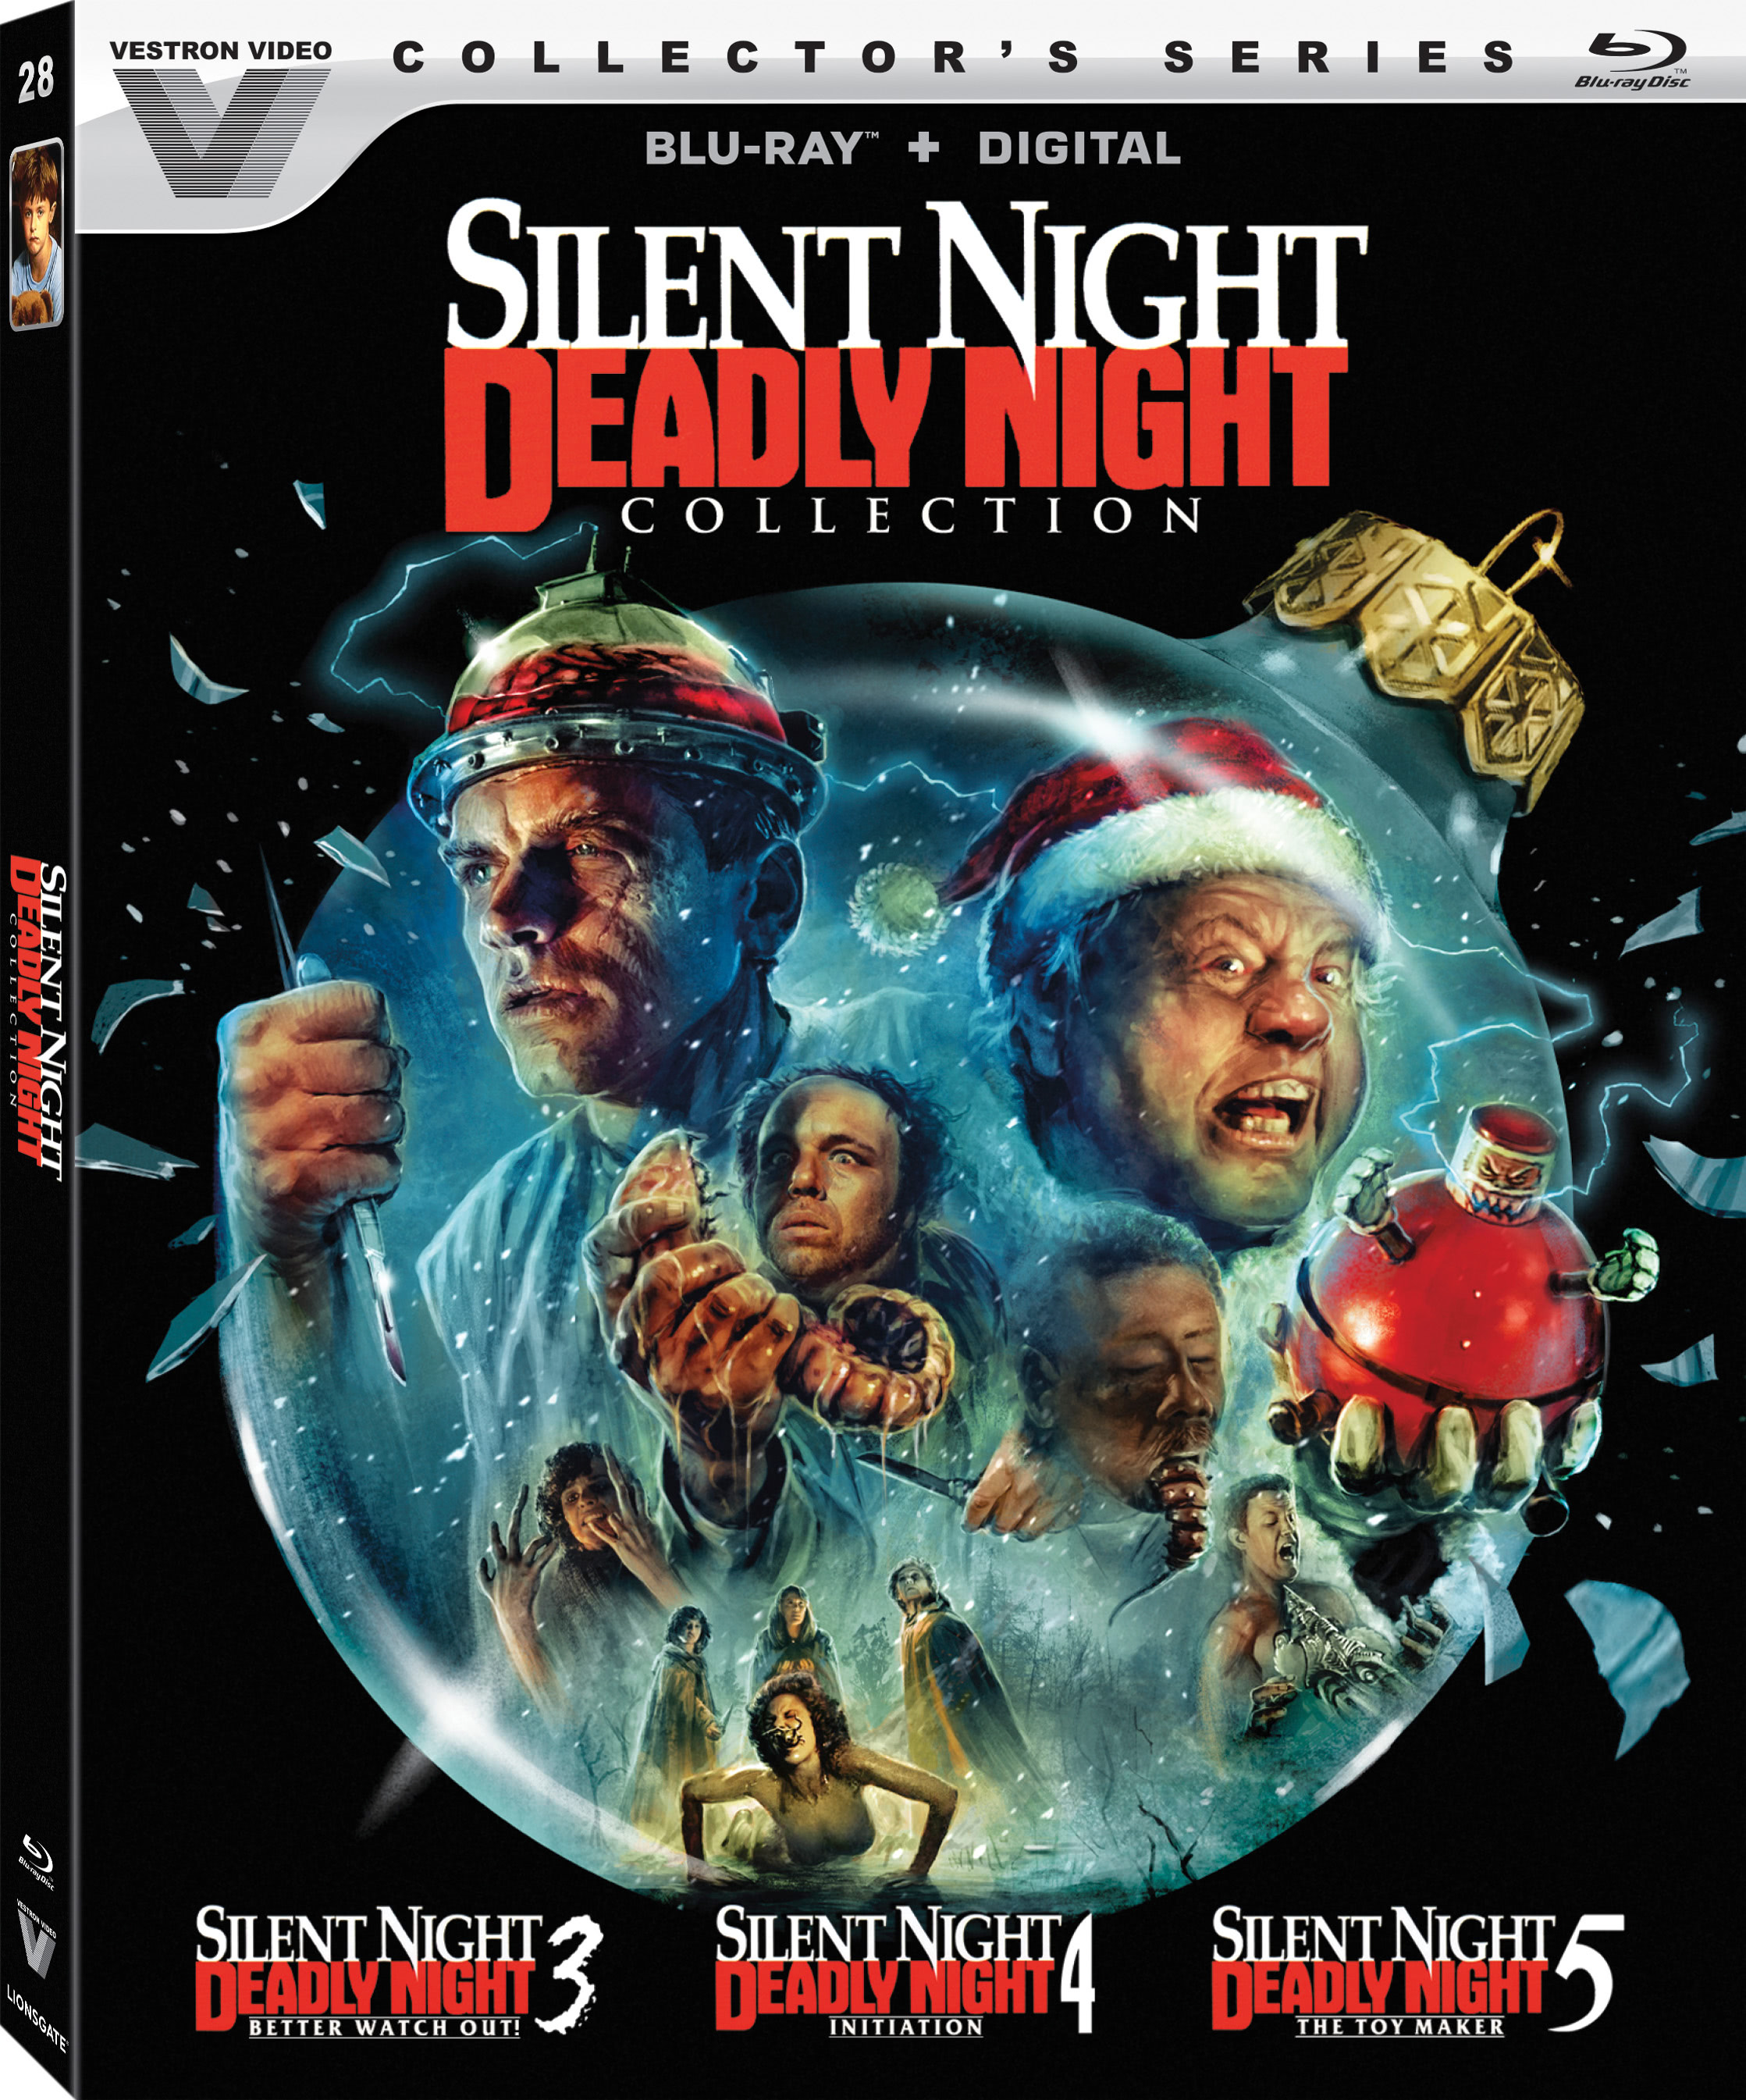 Vestron Releases Silent Night, Deadly Night 3-Film Collection Blu